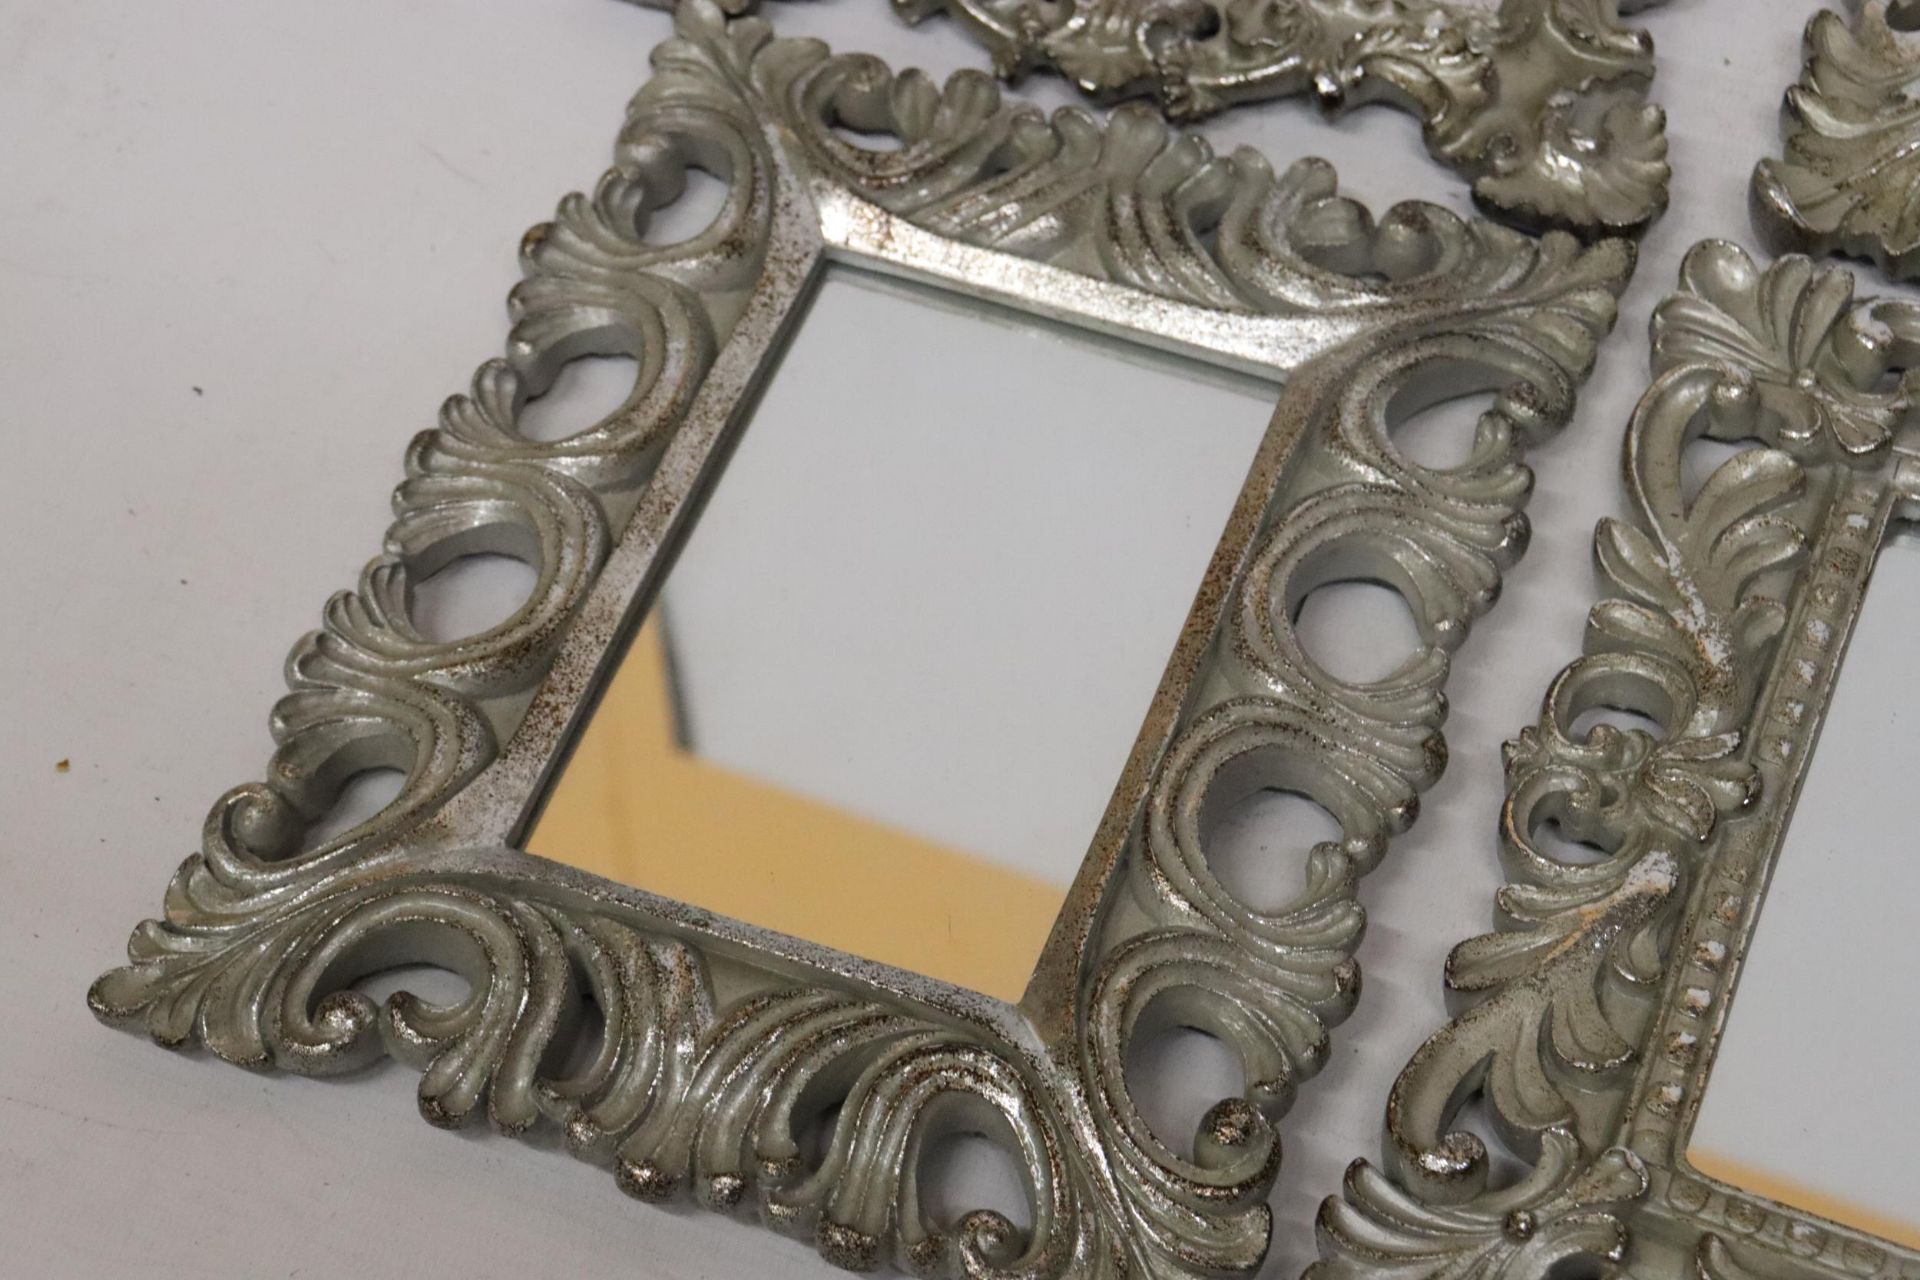 FIVE SMALL MIRRORS WITH ORNATE SILVER COLOURED FRAMES - Image 7 of 9